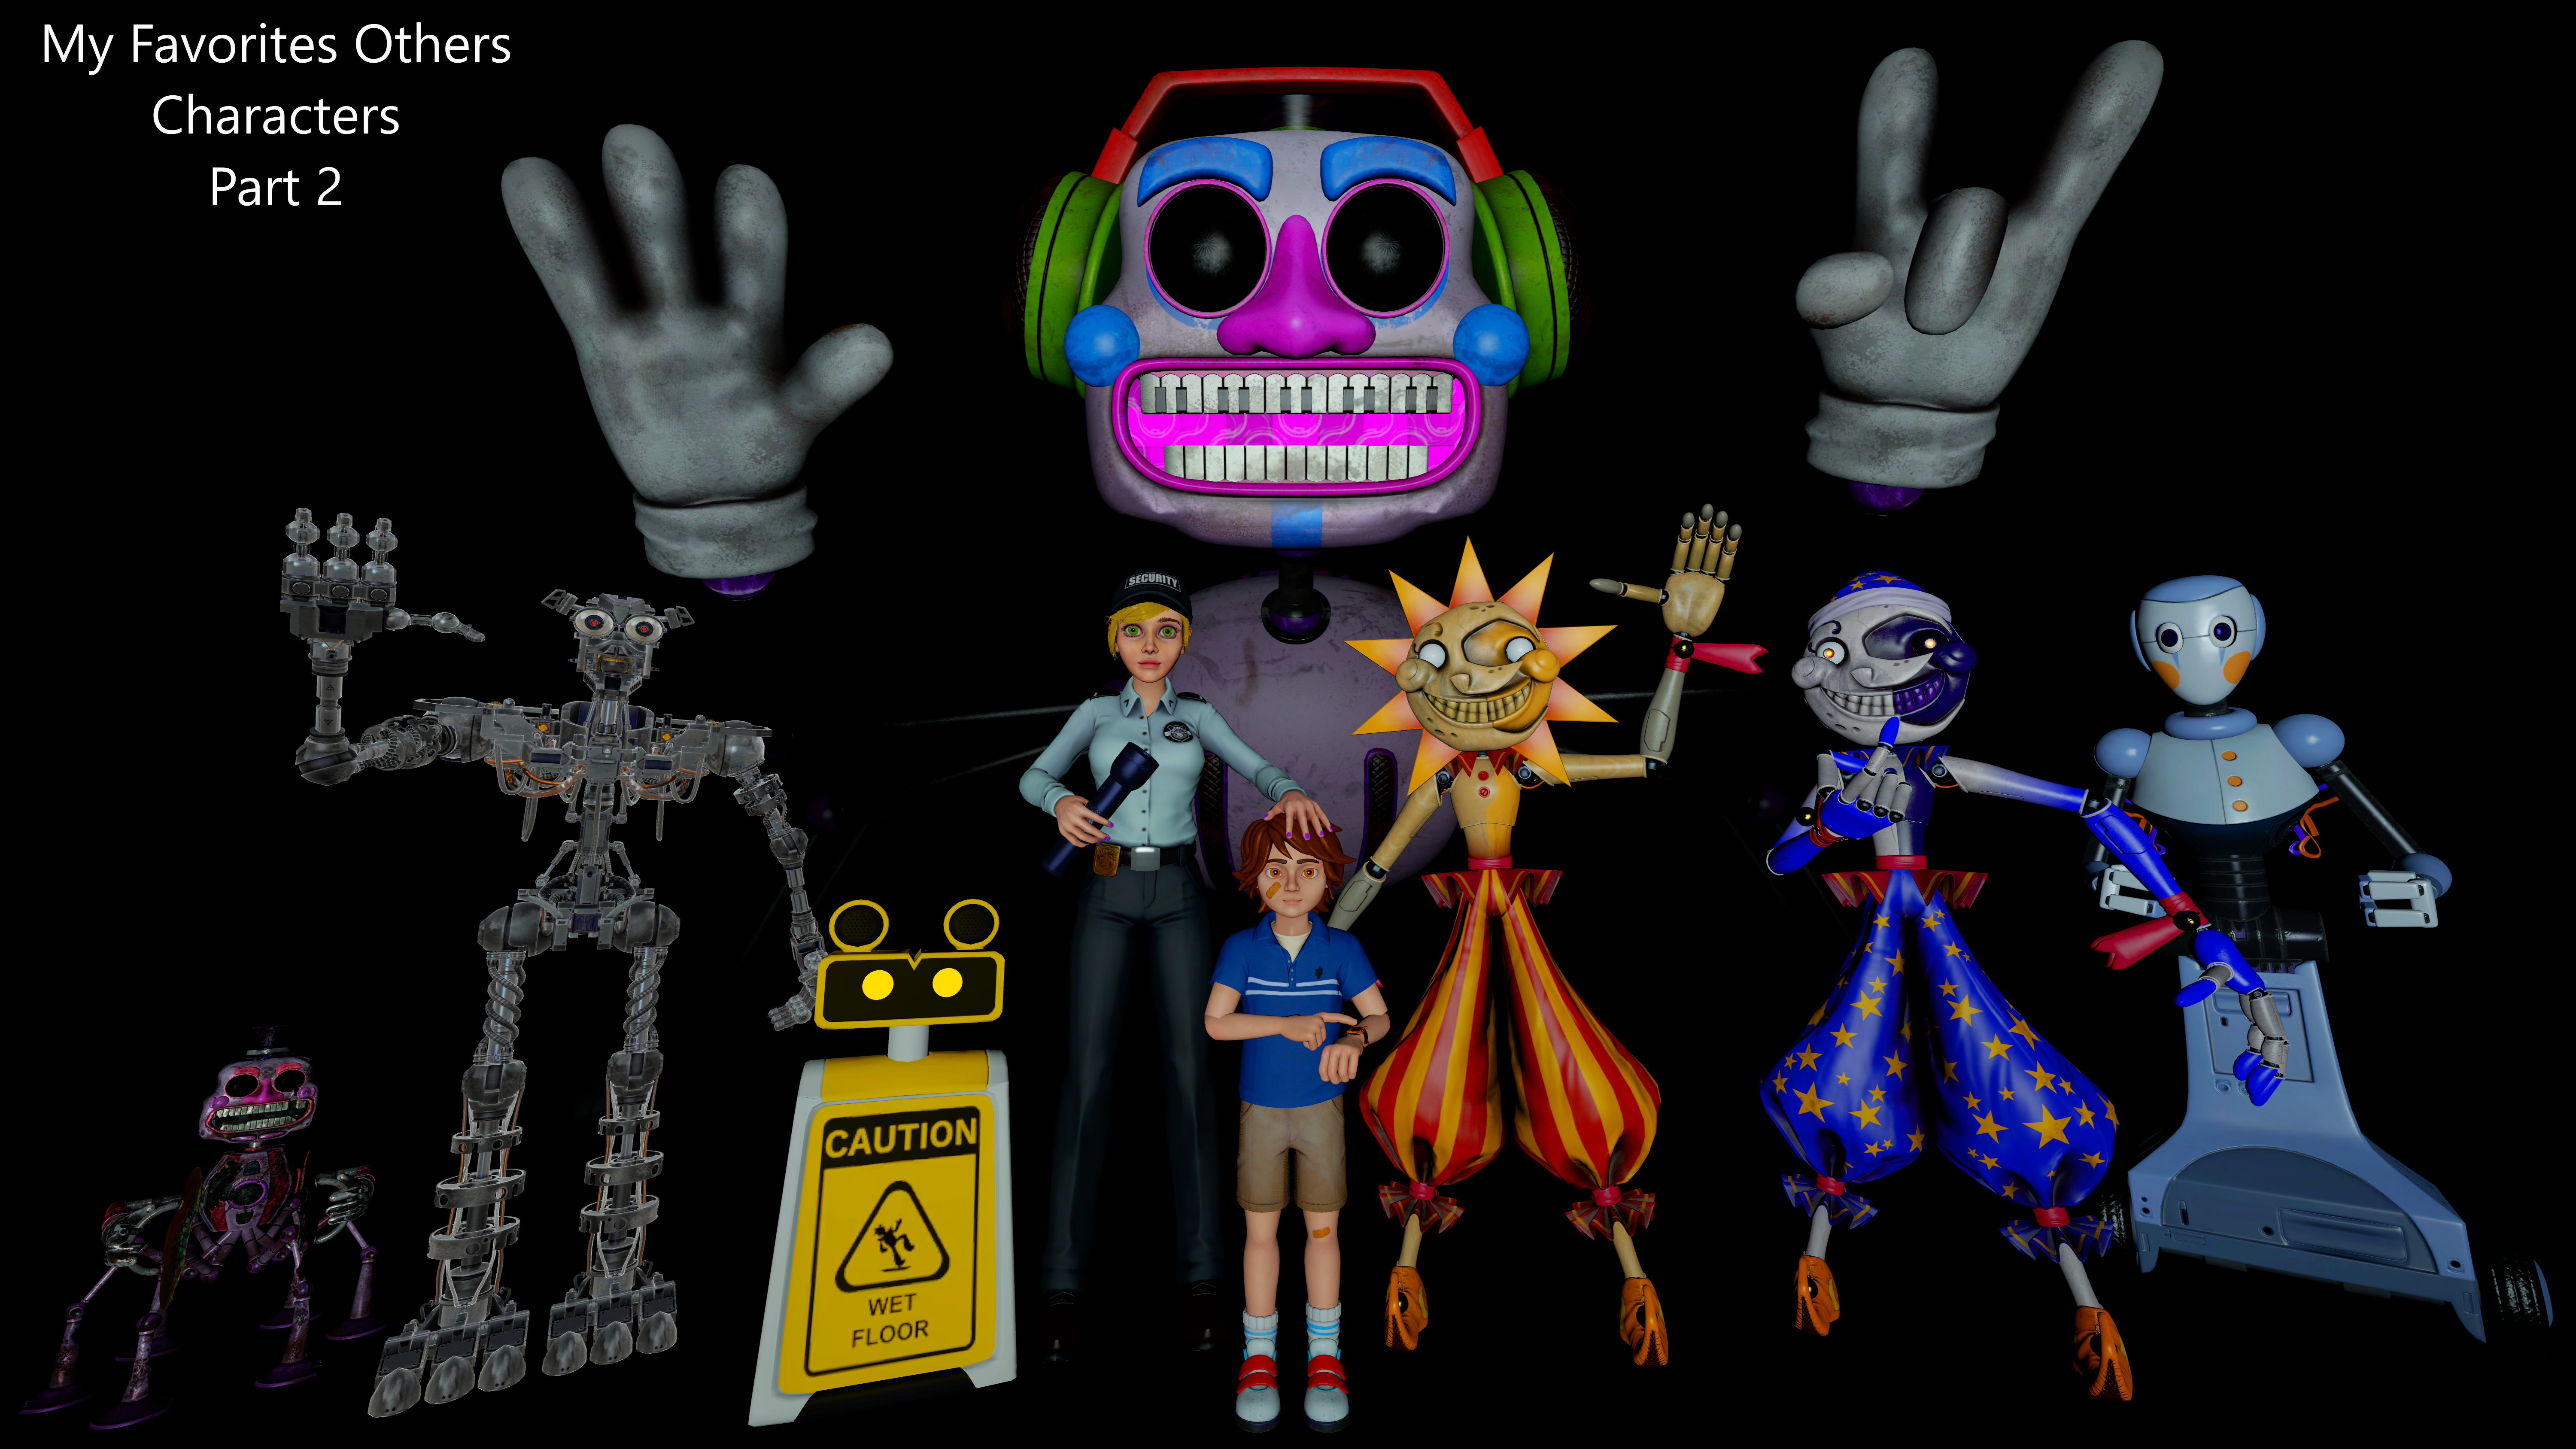 My Favorites Characters Of FNAF 1 V3 by mauricio2006 on DeviantArt